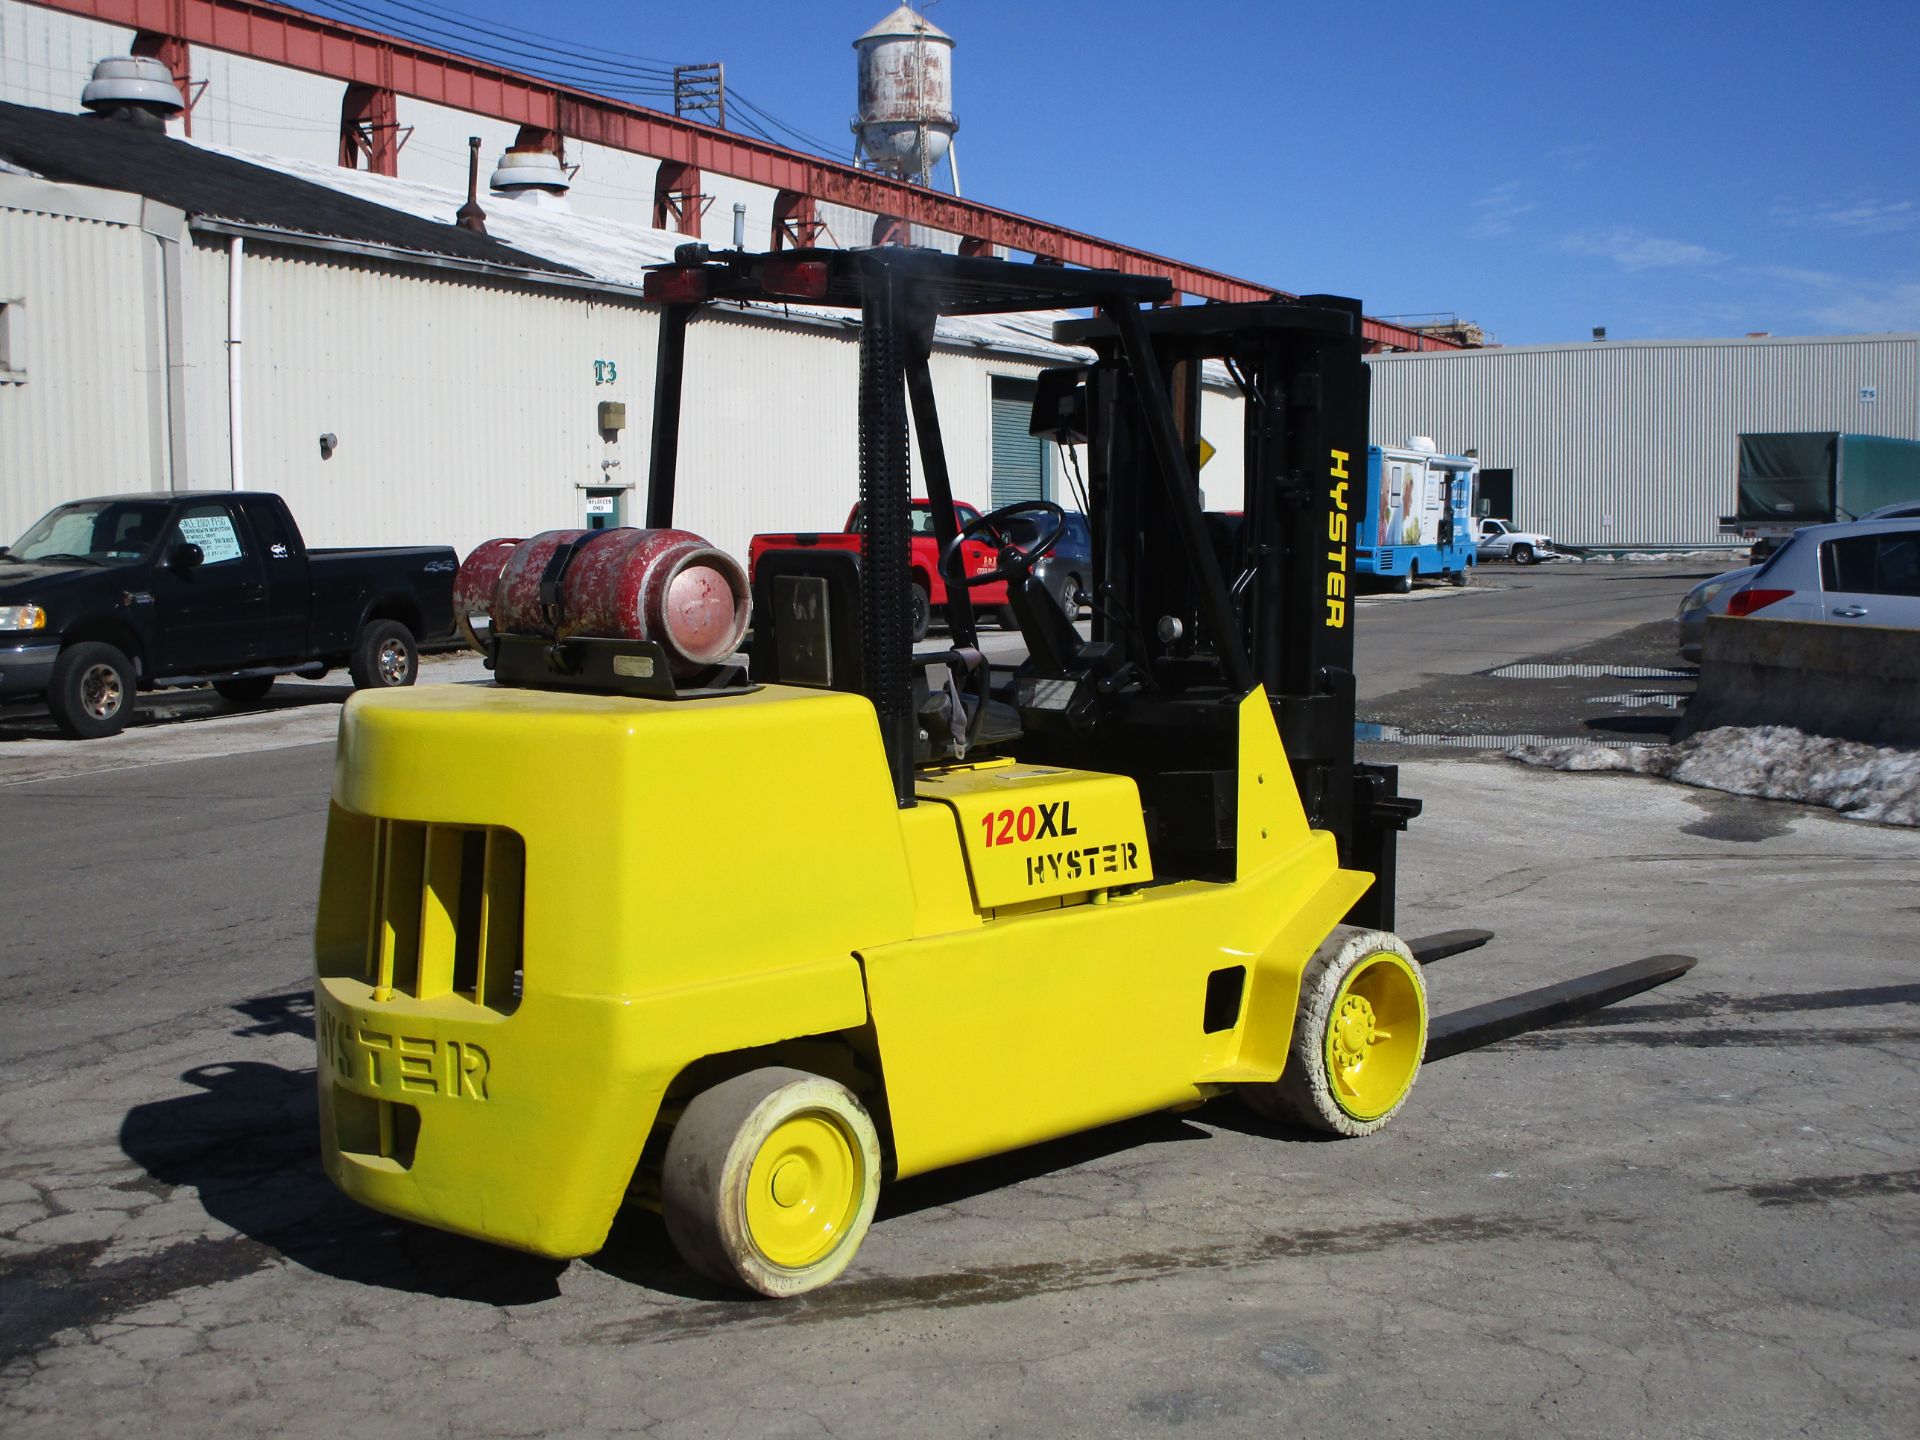 Hyster S120XL 12,000lb Forklift - Image 7 of 17